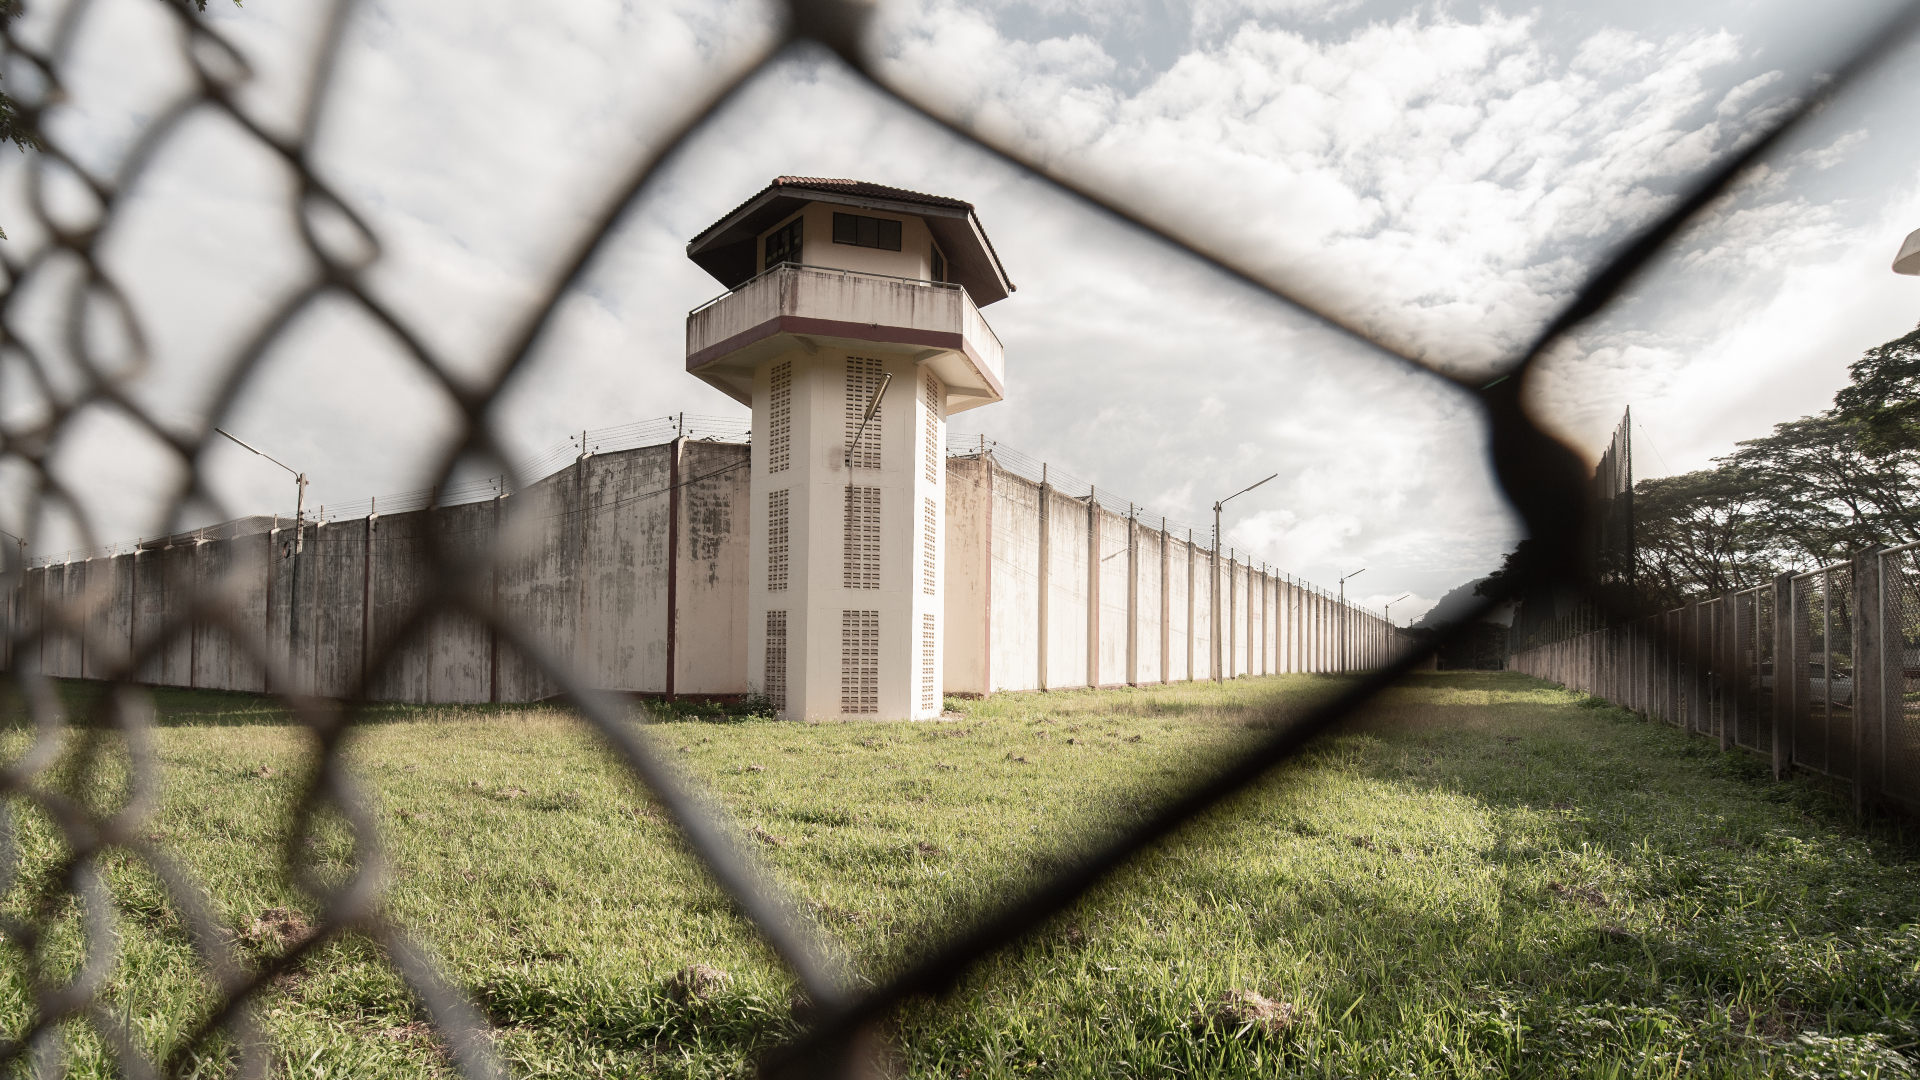 Exterior of a prison surrounded by green grass behind wire fence